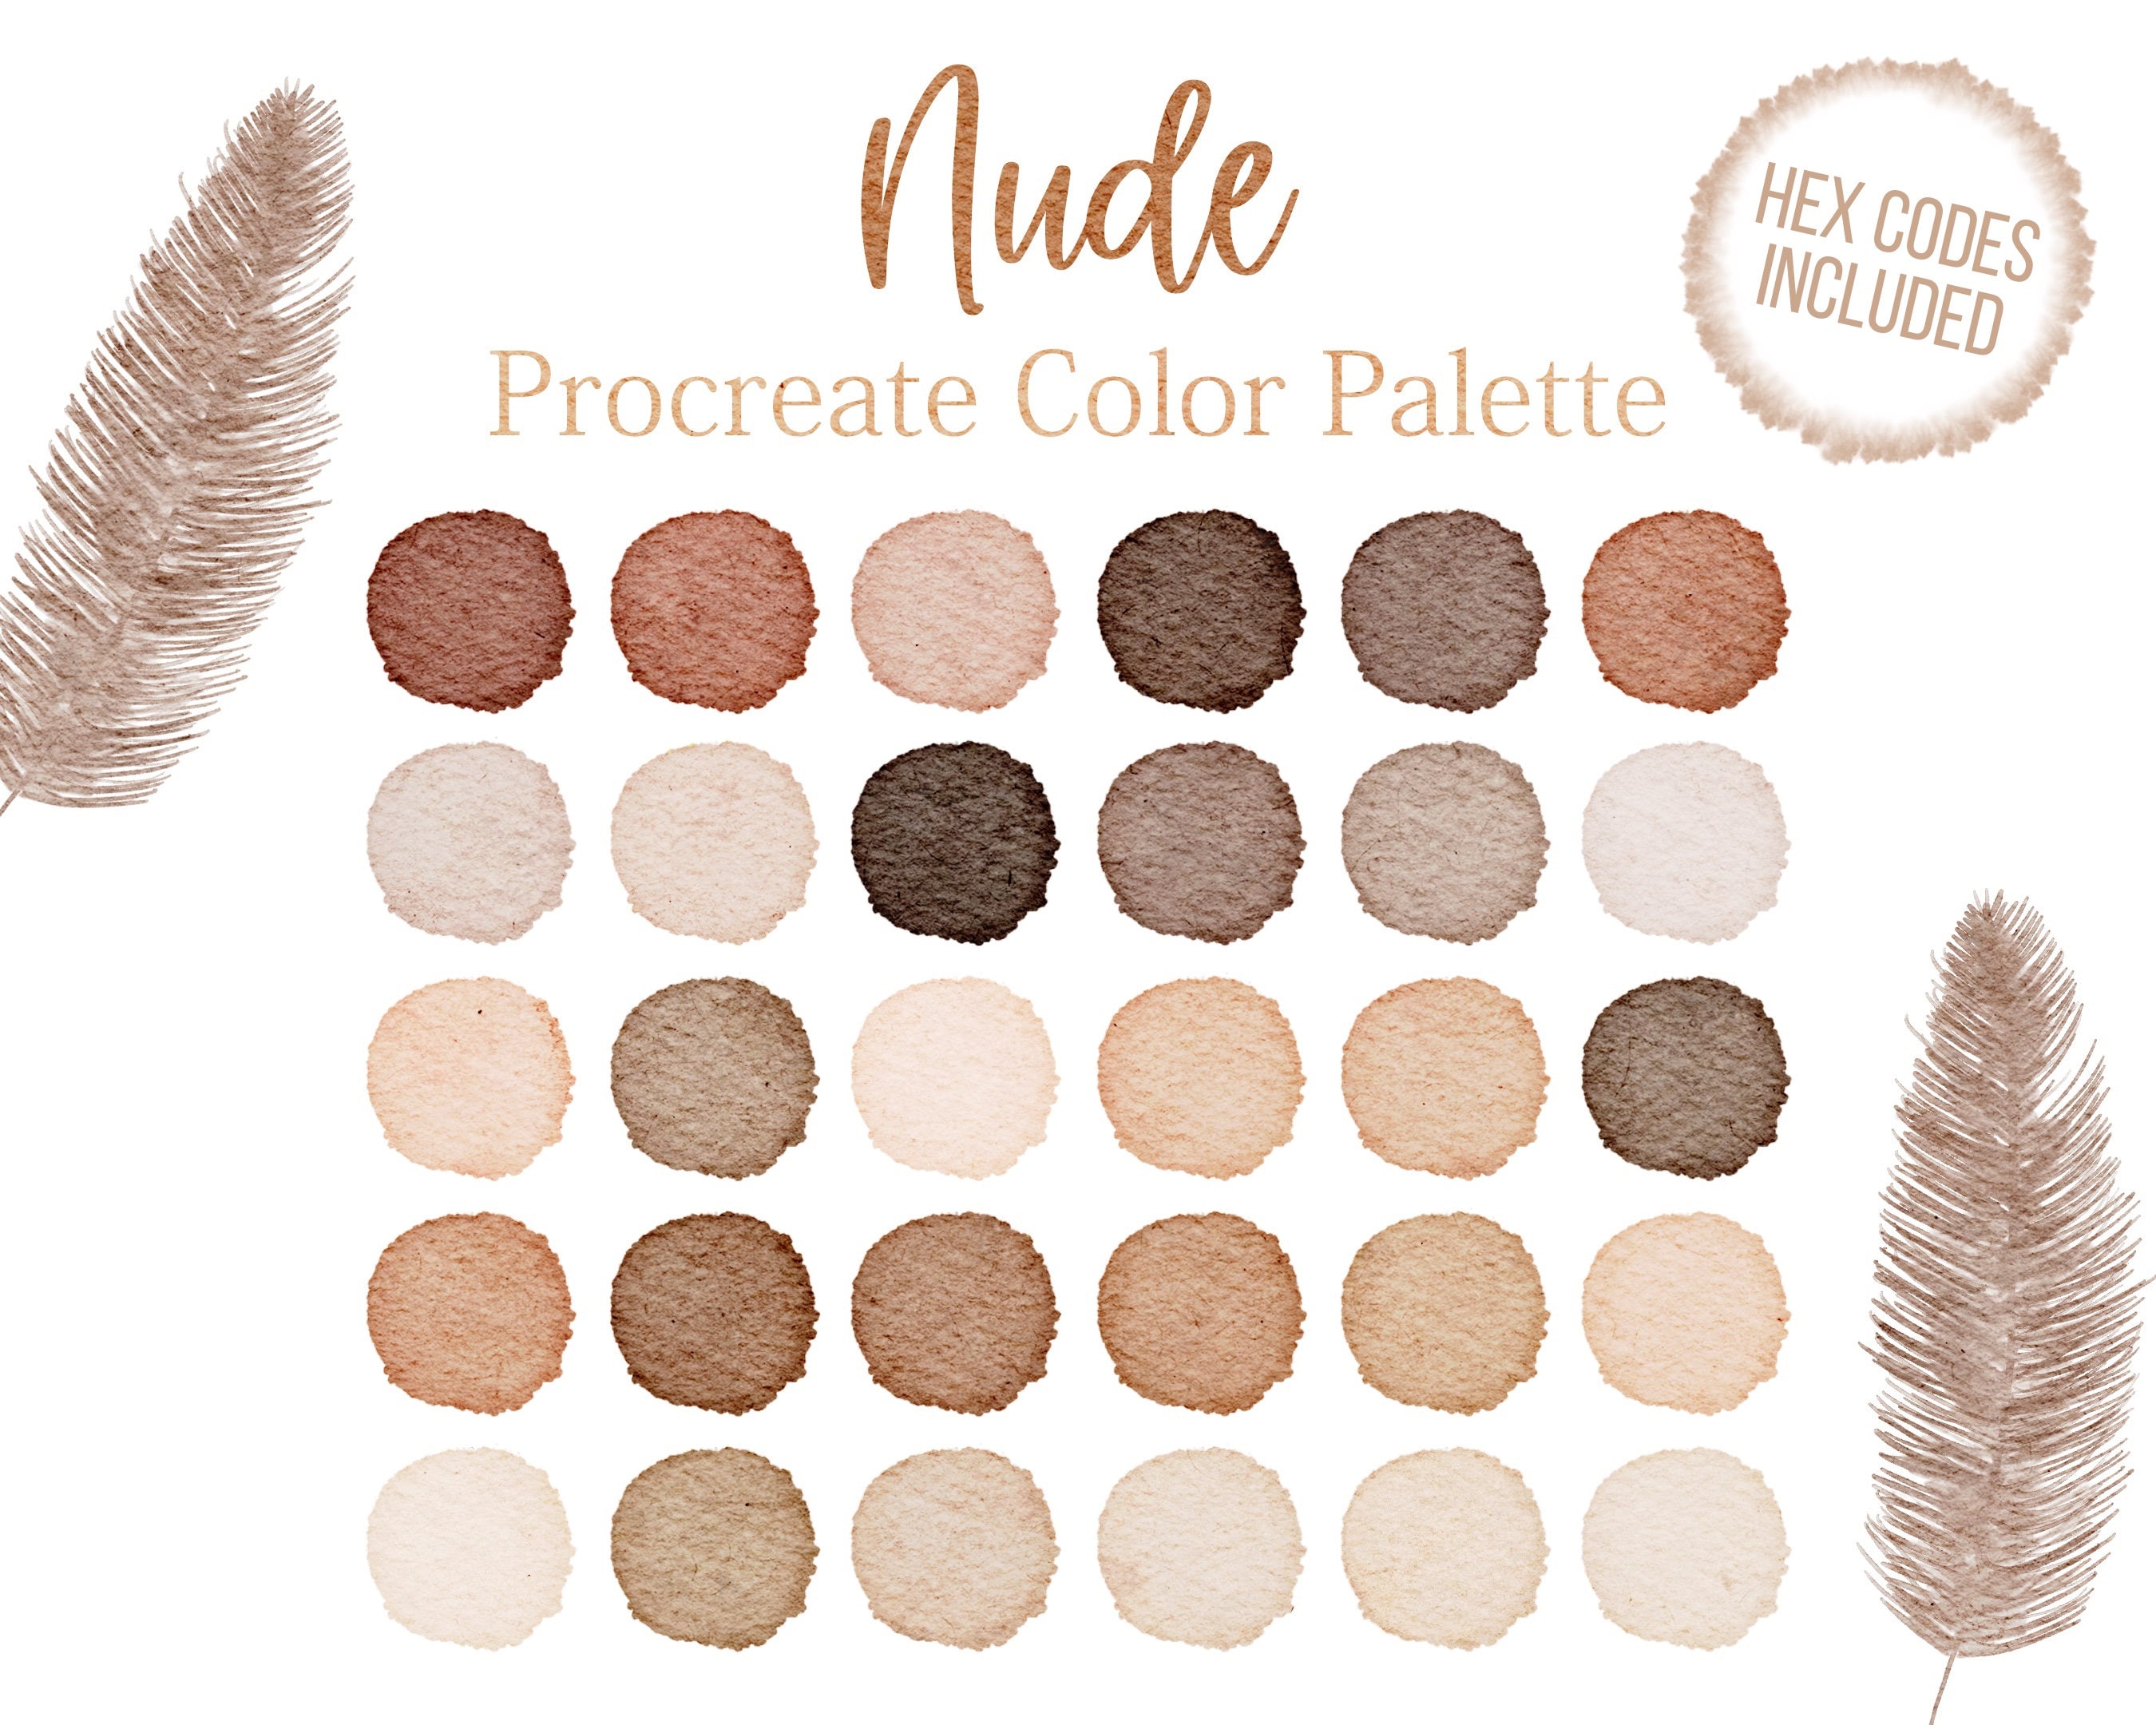 1. Neutral shades like beige, nude, or light pink - wide 9